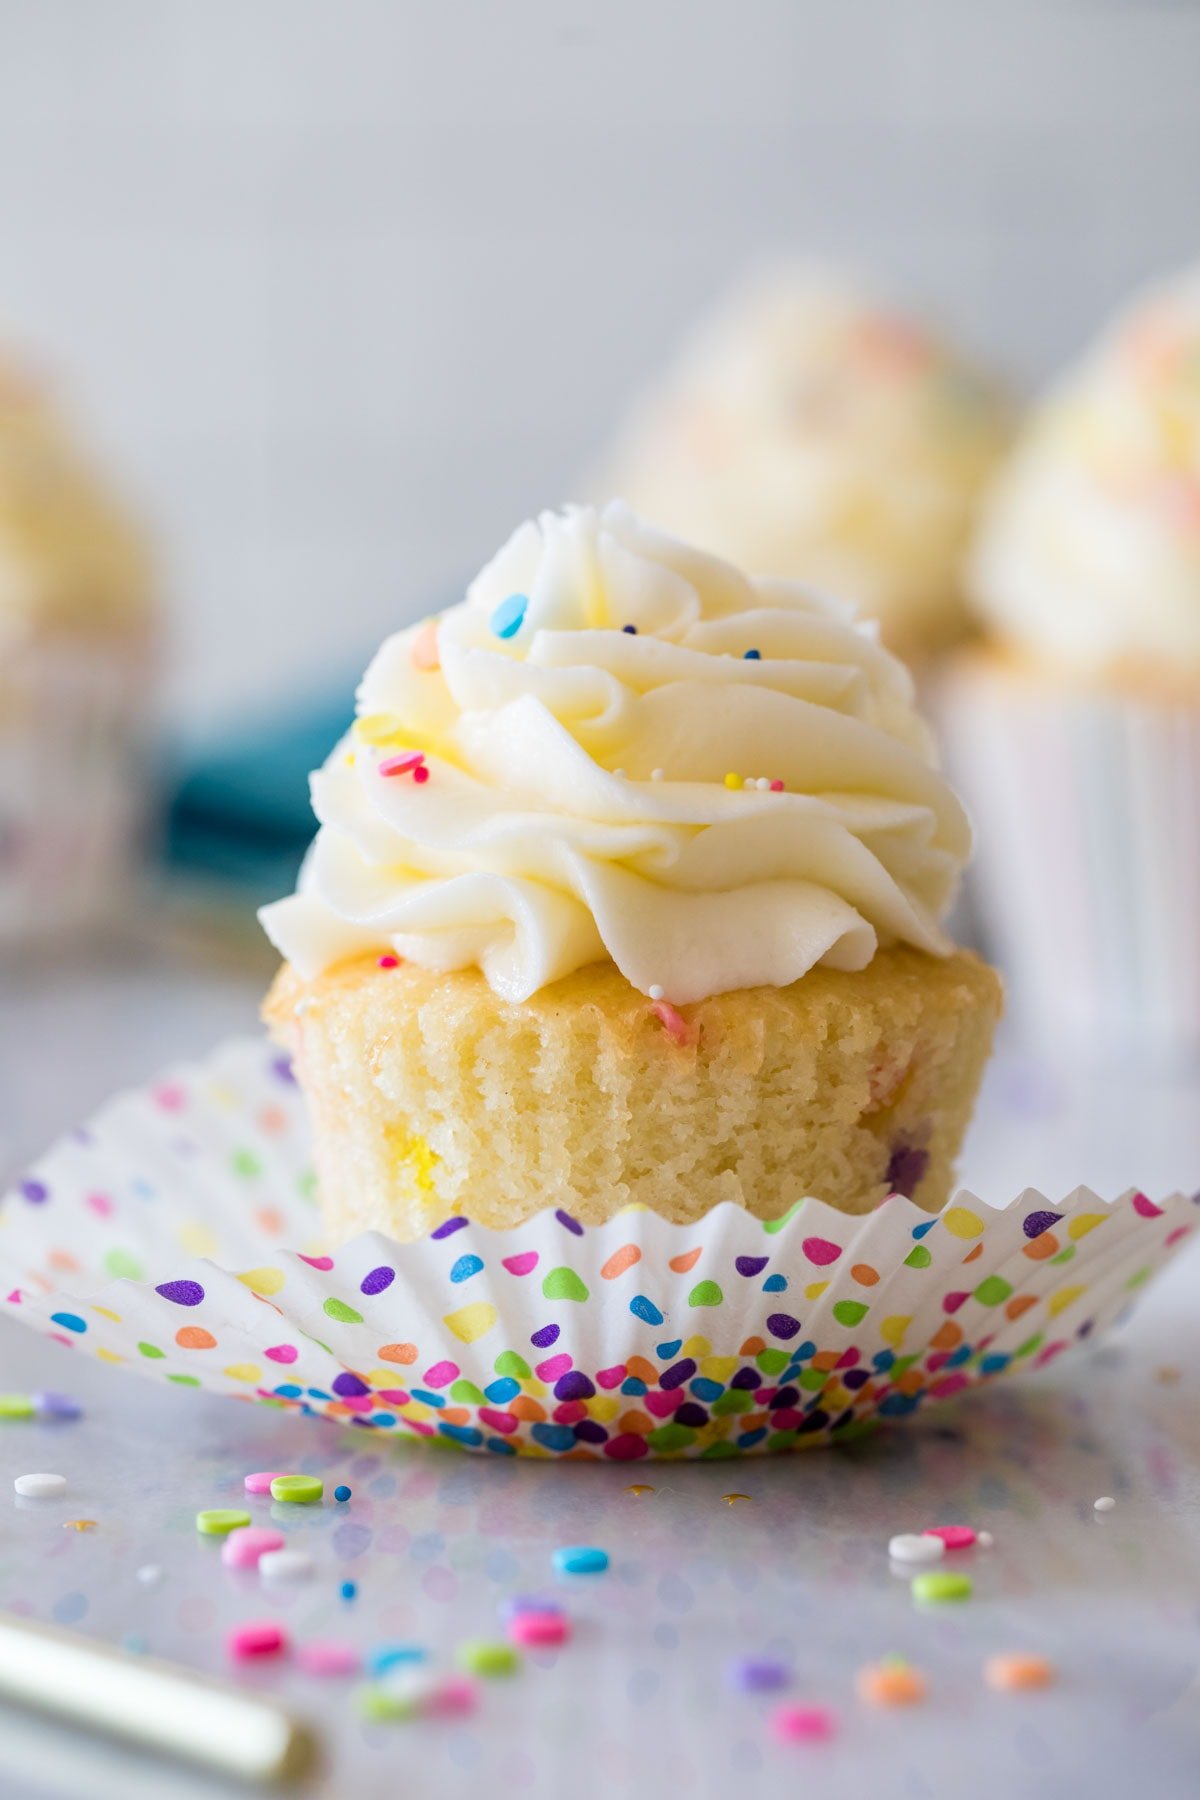 Sprinkle flecked birthday cupcake in a colorful polka dot wrapper that has been unwrapped.